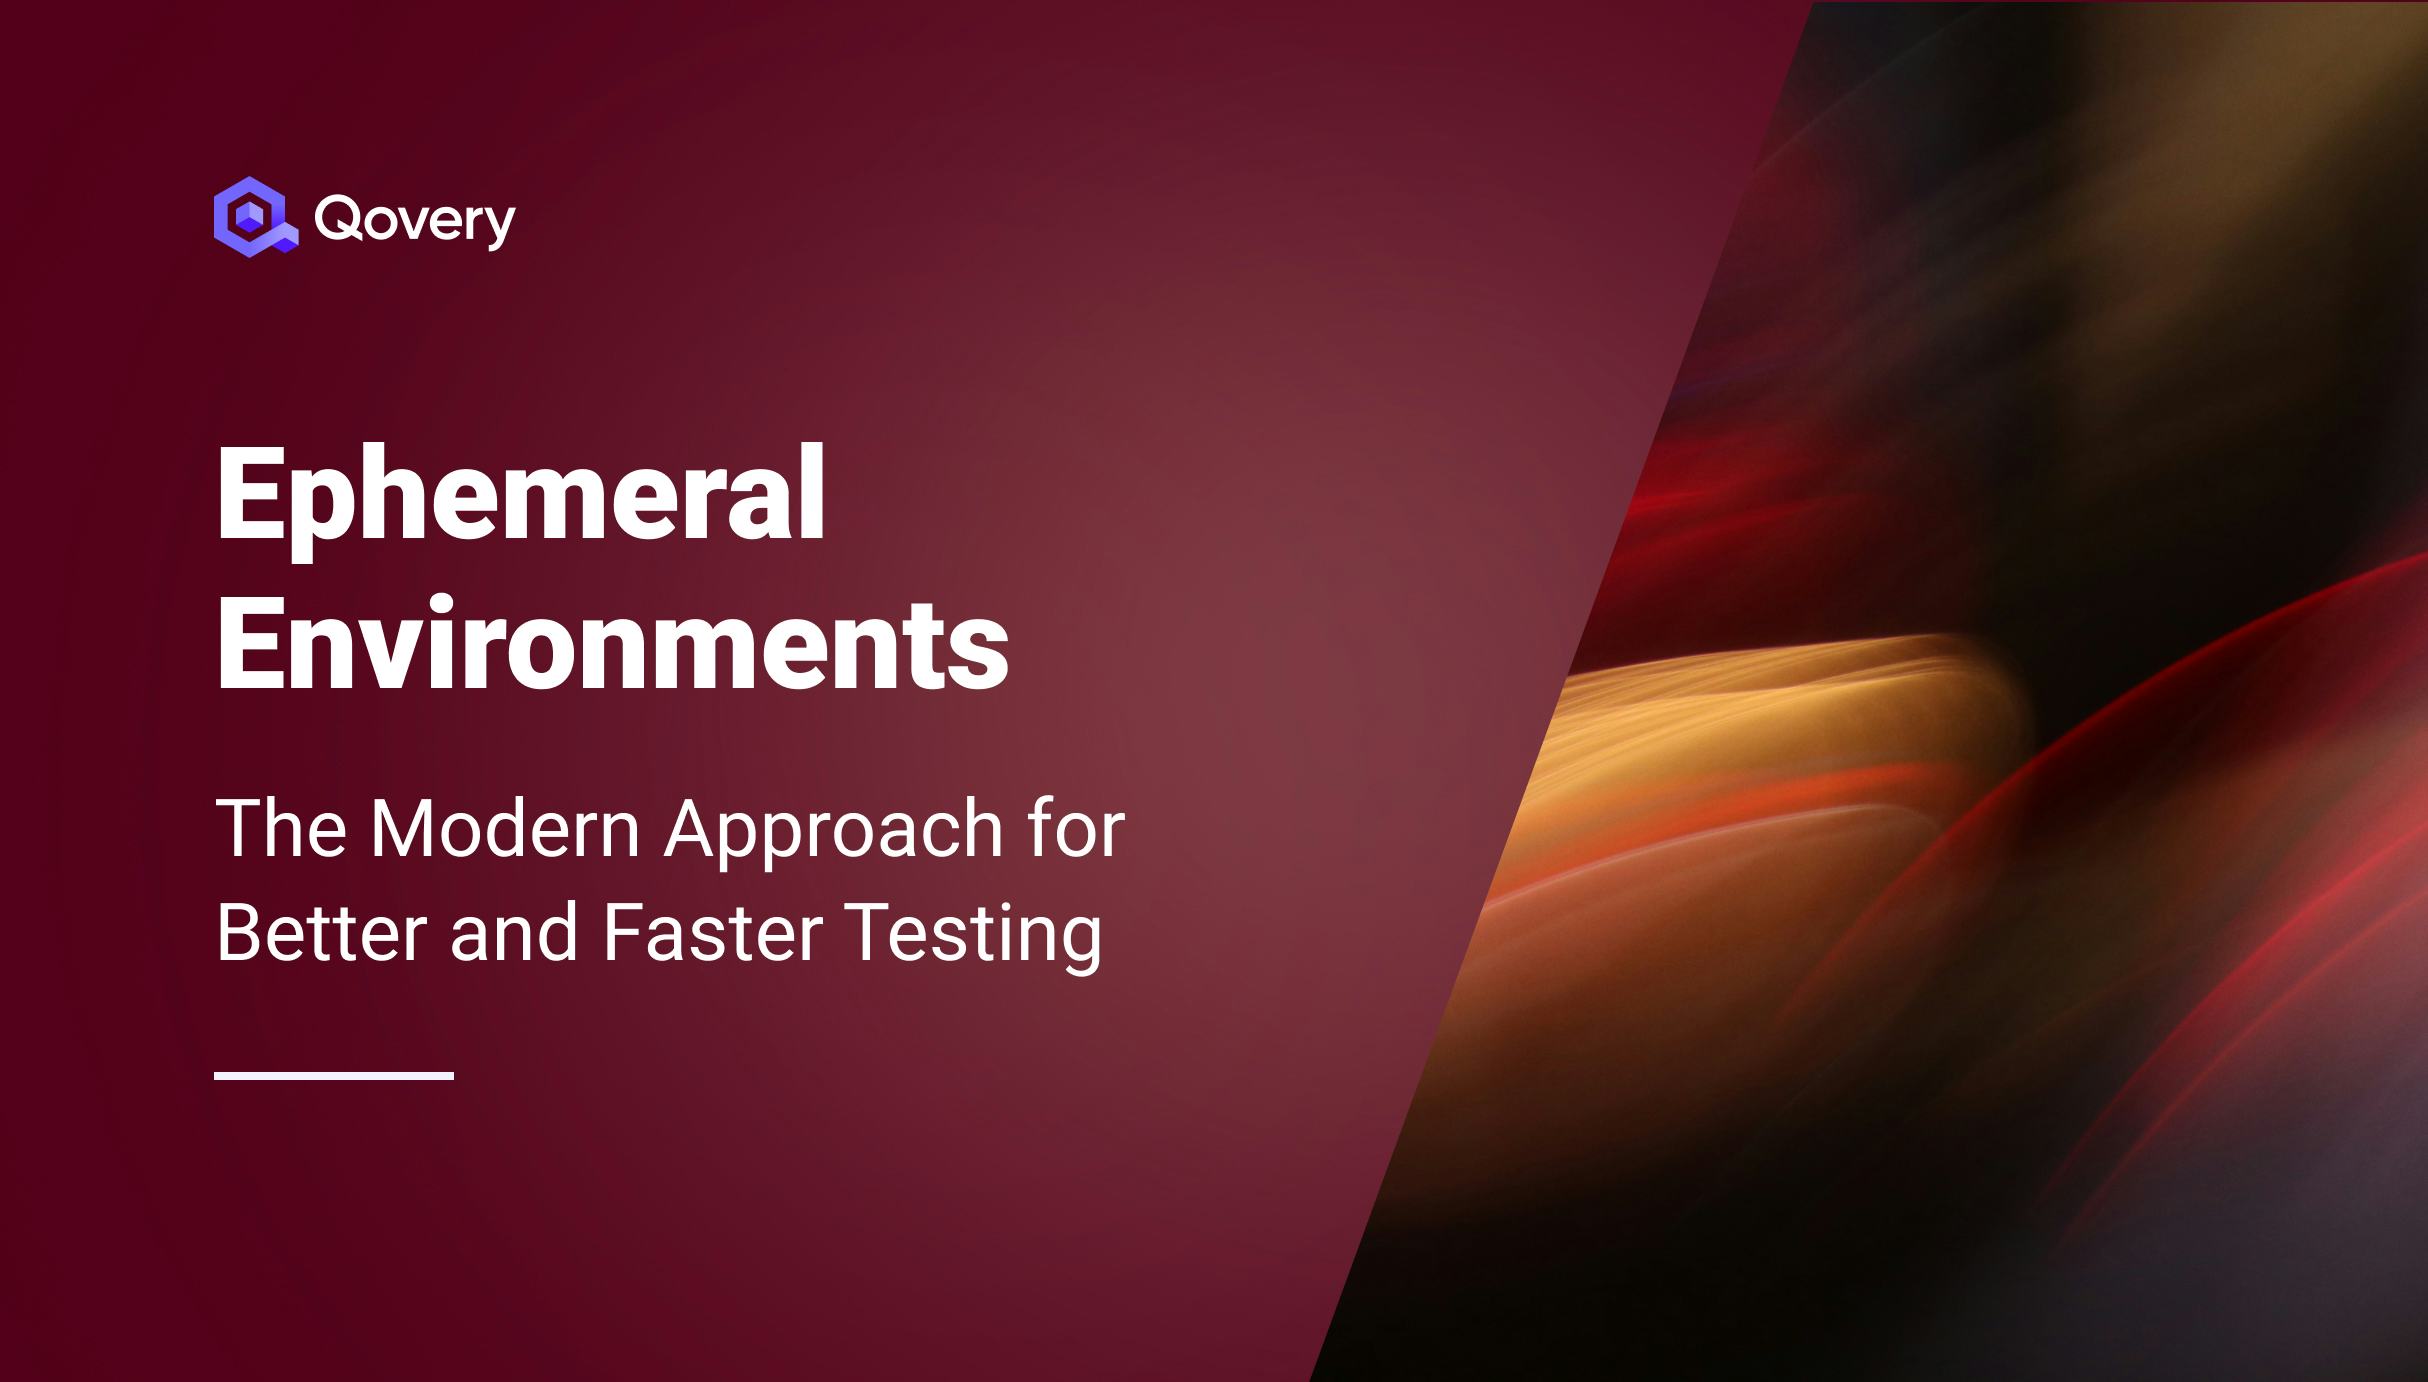 Ephemeral Environments: The Modern Approach for Better and Faster Testing